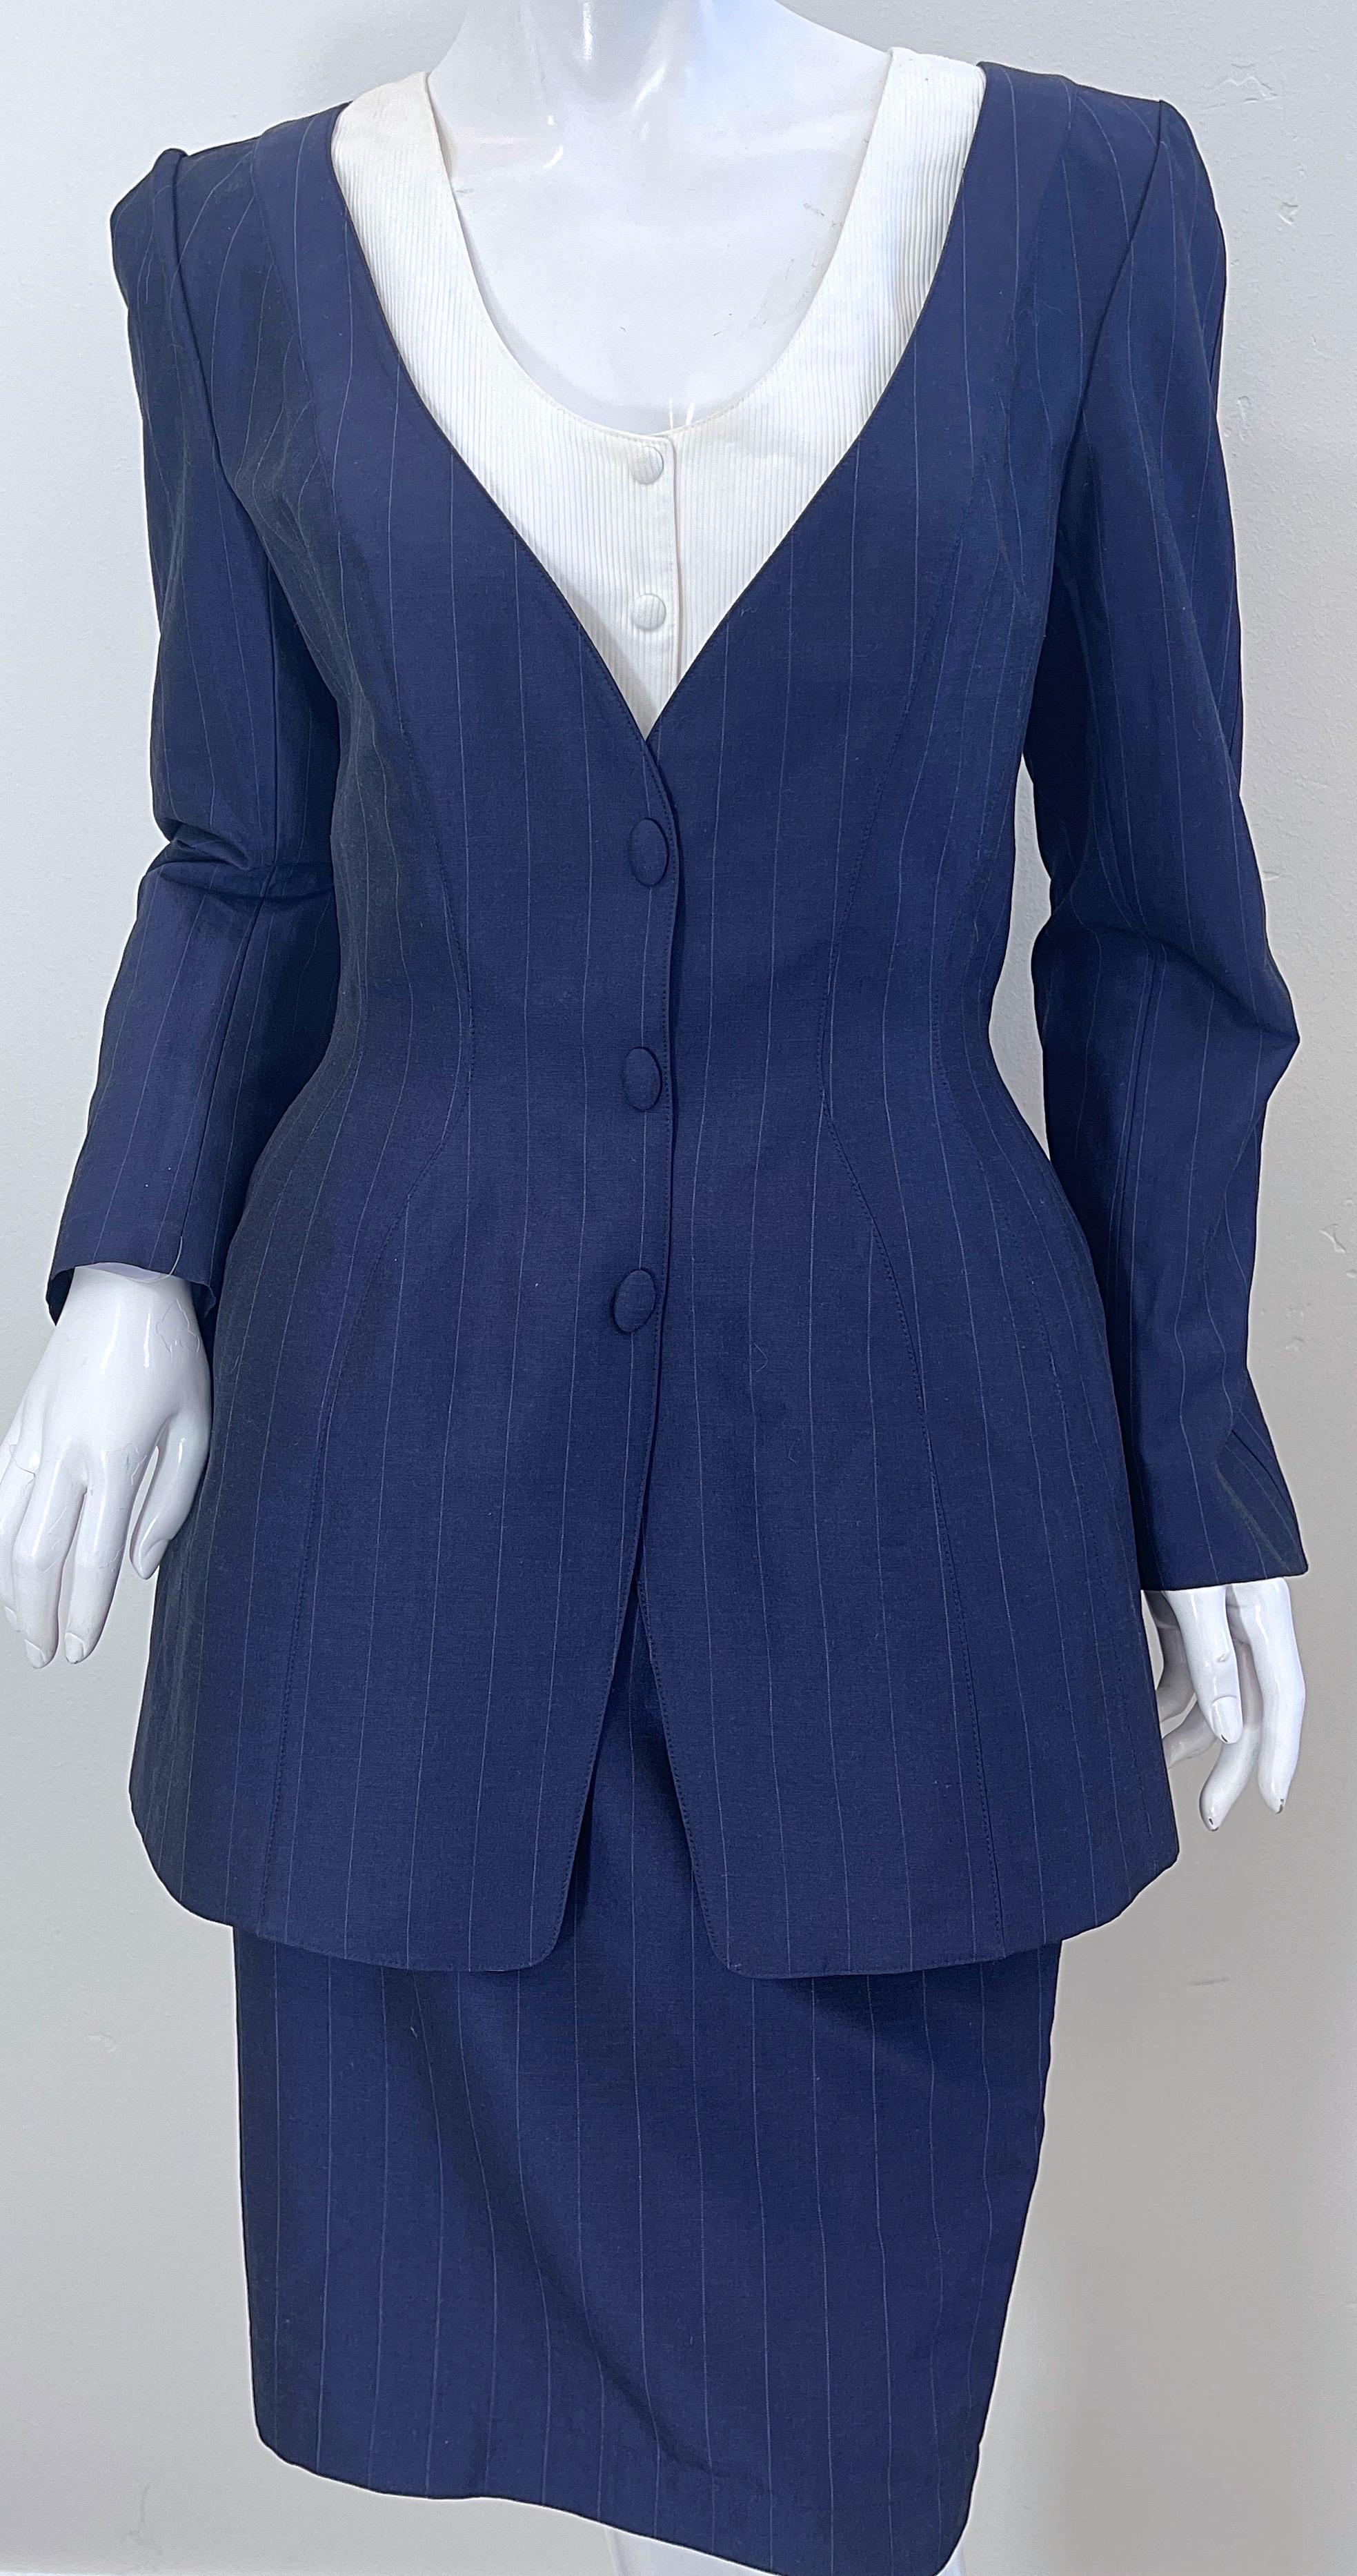 NWT 1990s Thierry Mugler Navy Blue Pinstripe Size 4 Vintage 90s Skirt Suit For Sale 2